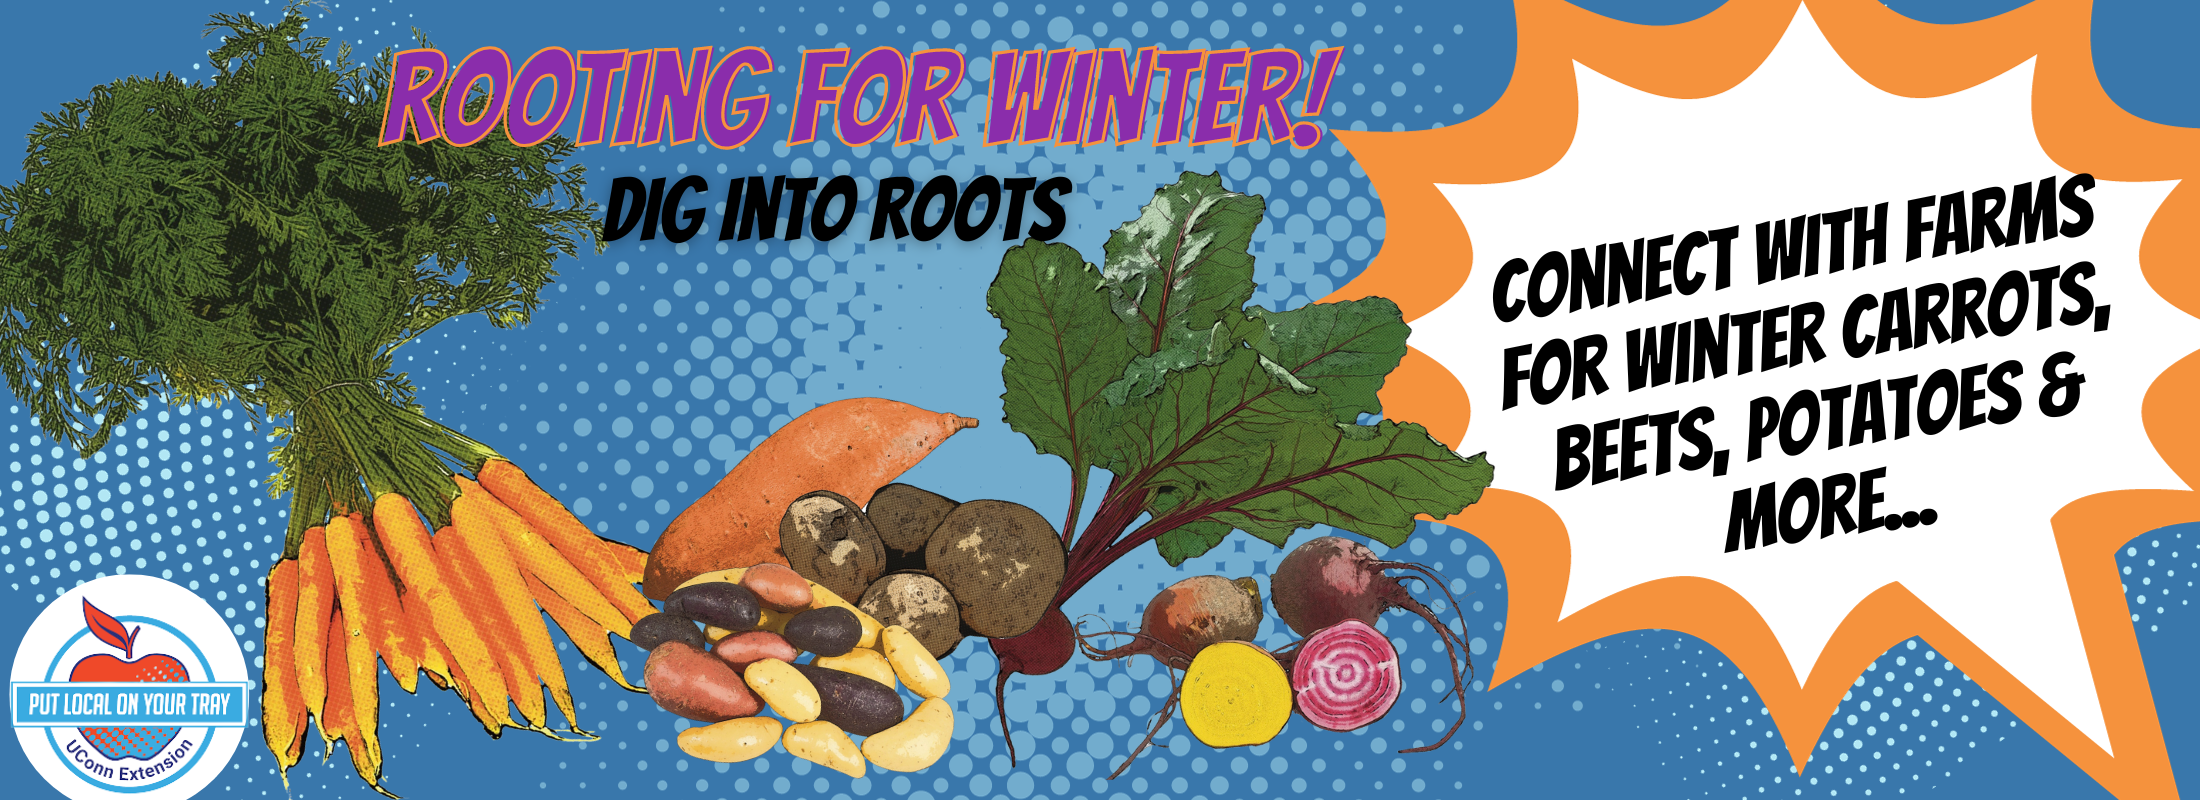 Rooting for Winter: Connect with farms for winter carrots, beets, potatoes, and more!